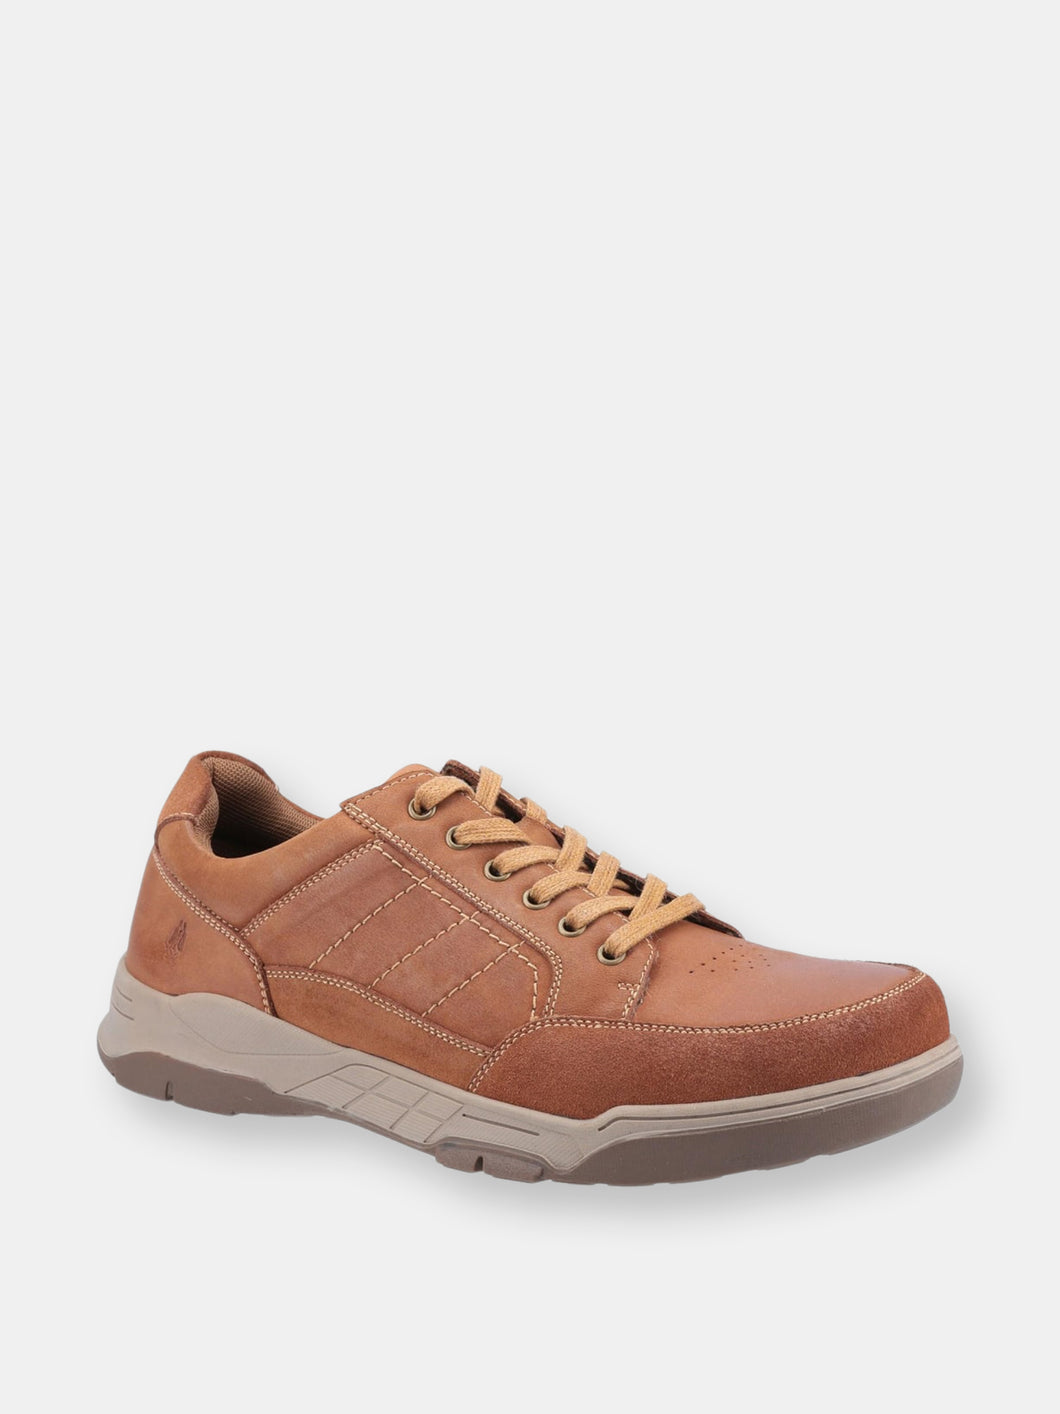 Hush Puppies Mens Finley Leather Shoes (Tan)